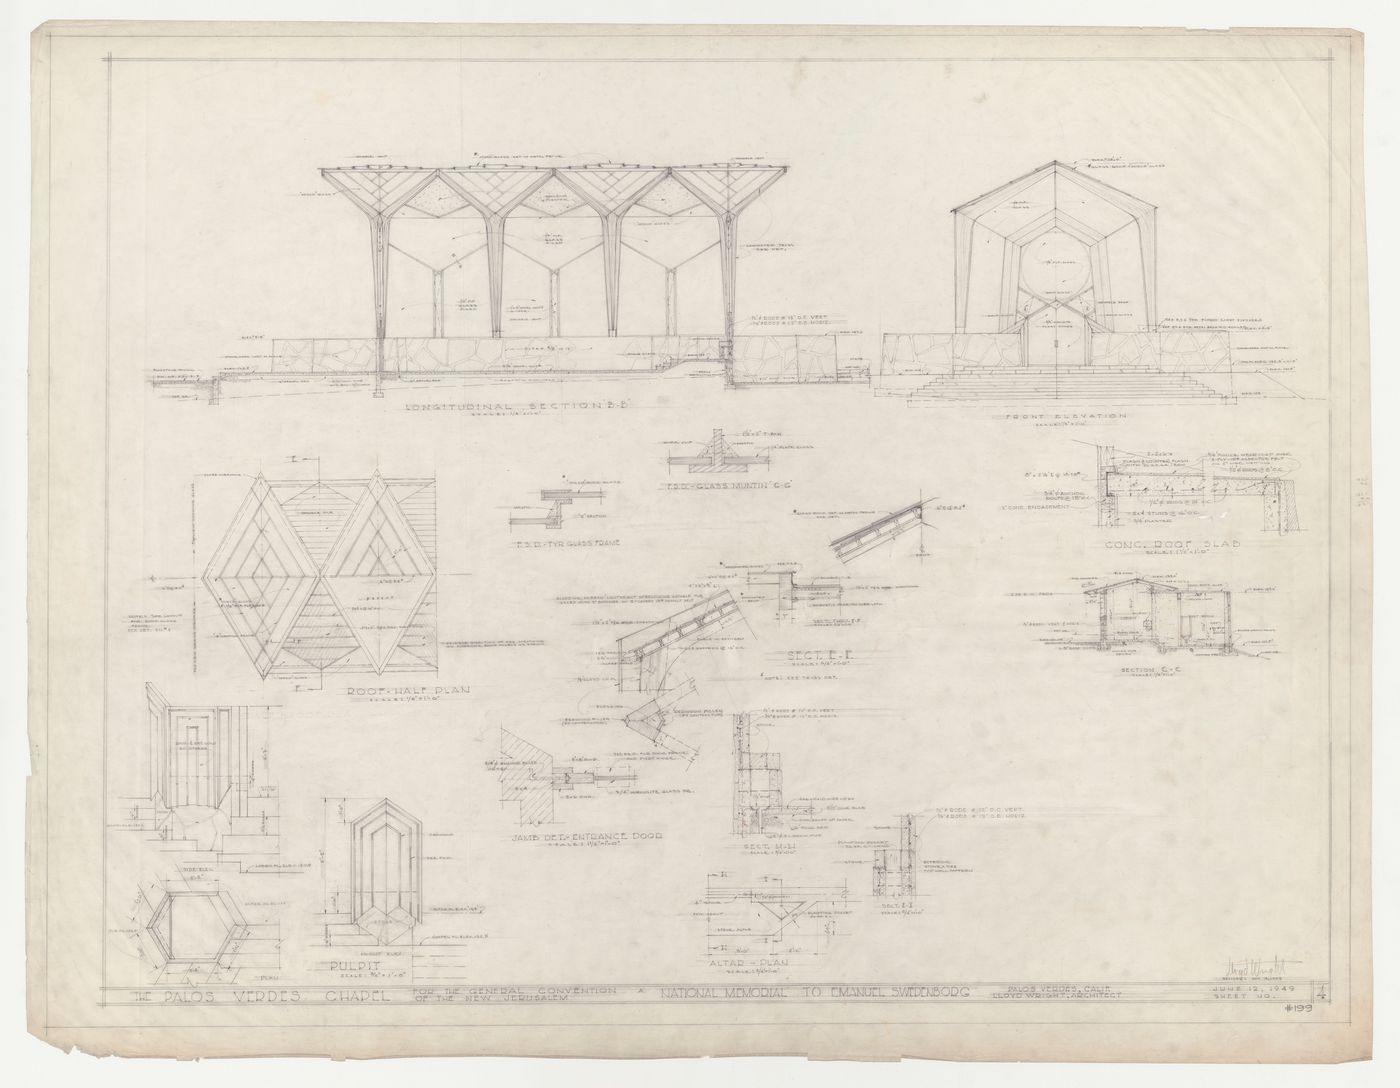 Wayfarers' Chapel, Palos Verdes, California: Longitudinal section and front elevation for the chapel, plan and elevations for the pulpit, and half plan for the chapel roof, with construction details